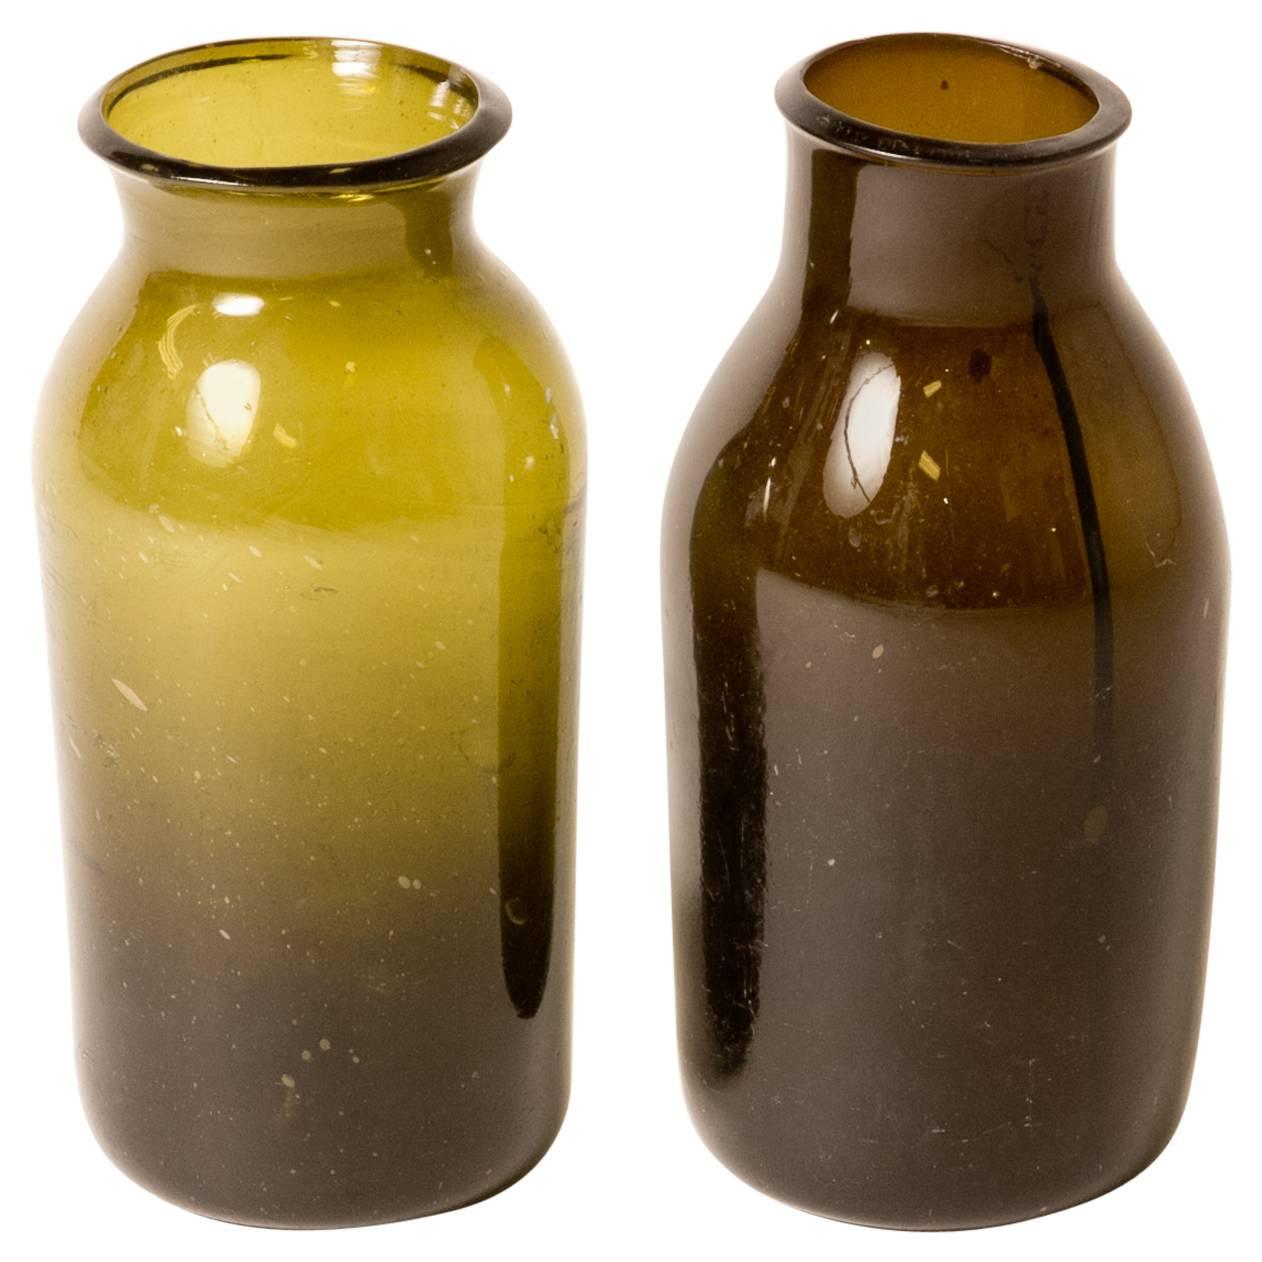 Green Hand Blown Glass Bottle from Mid-19th Century France